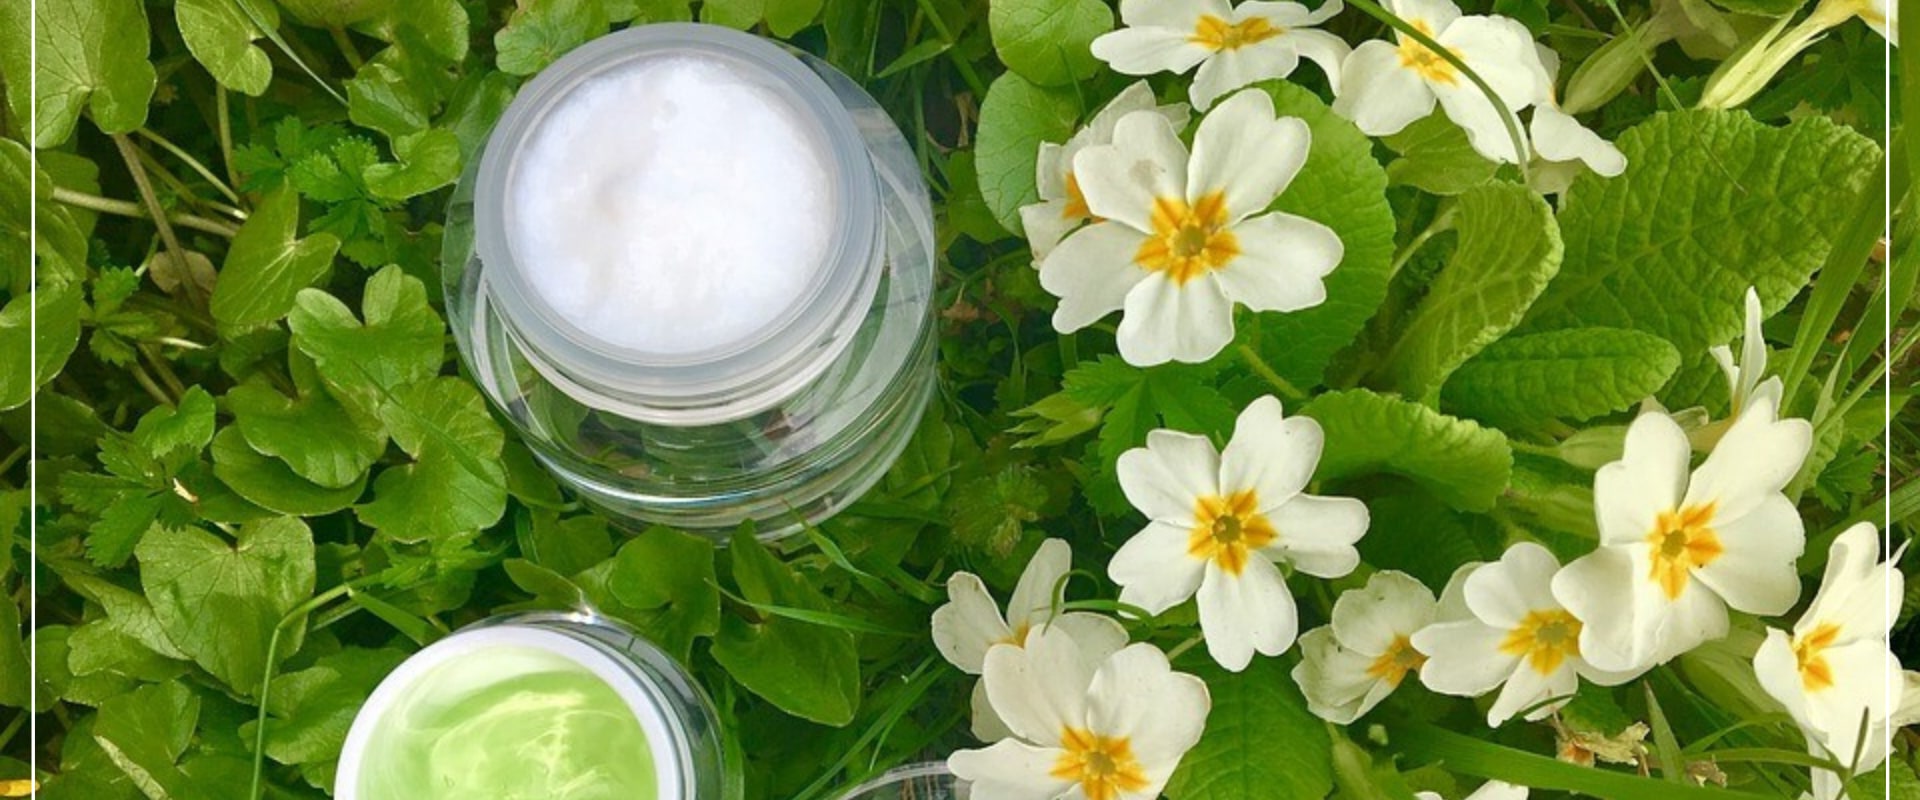 Are Natural Beauty Products Really Safer?